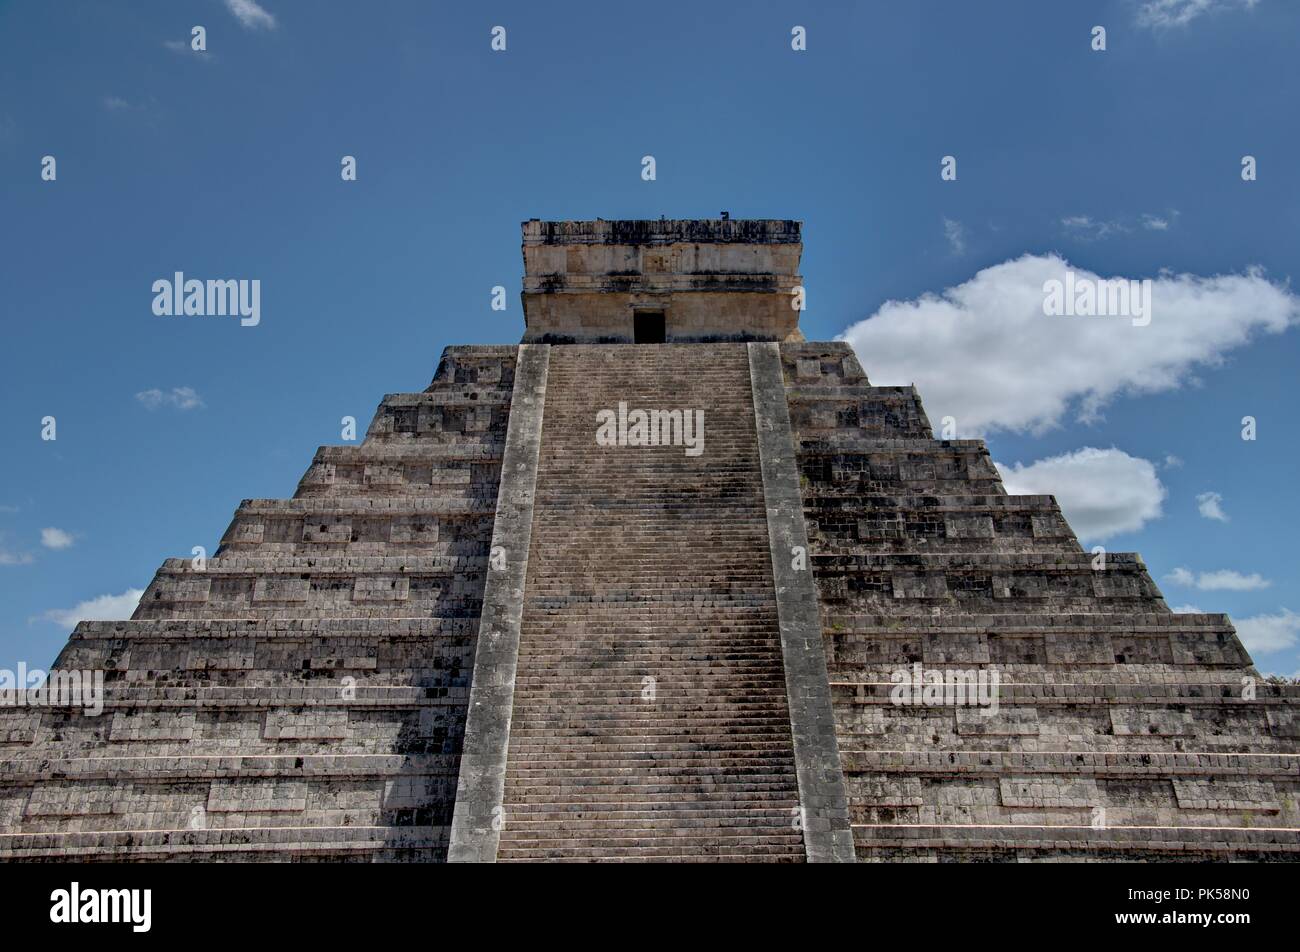 Ancient Castle made out of stone. Mayan palace with a blue sky background. El Castillo heritage site. Stock Photo